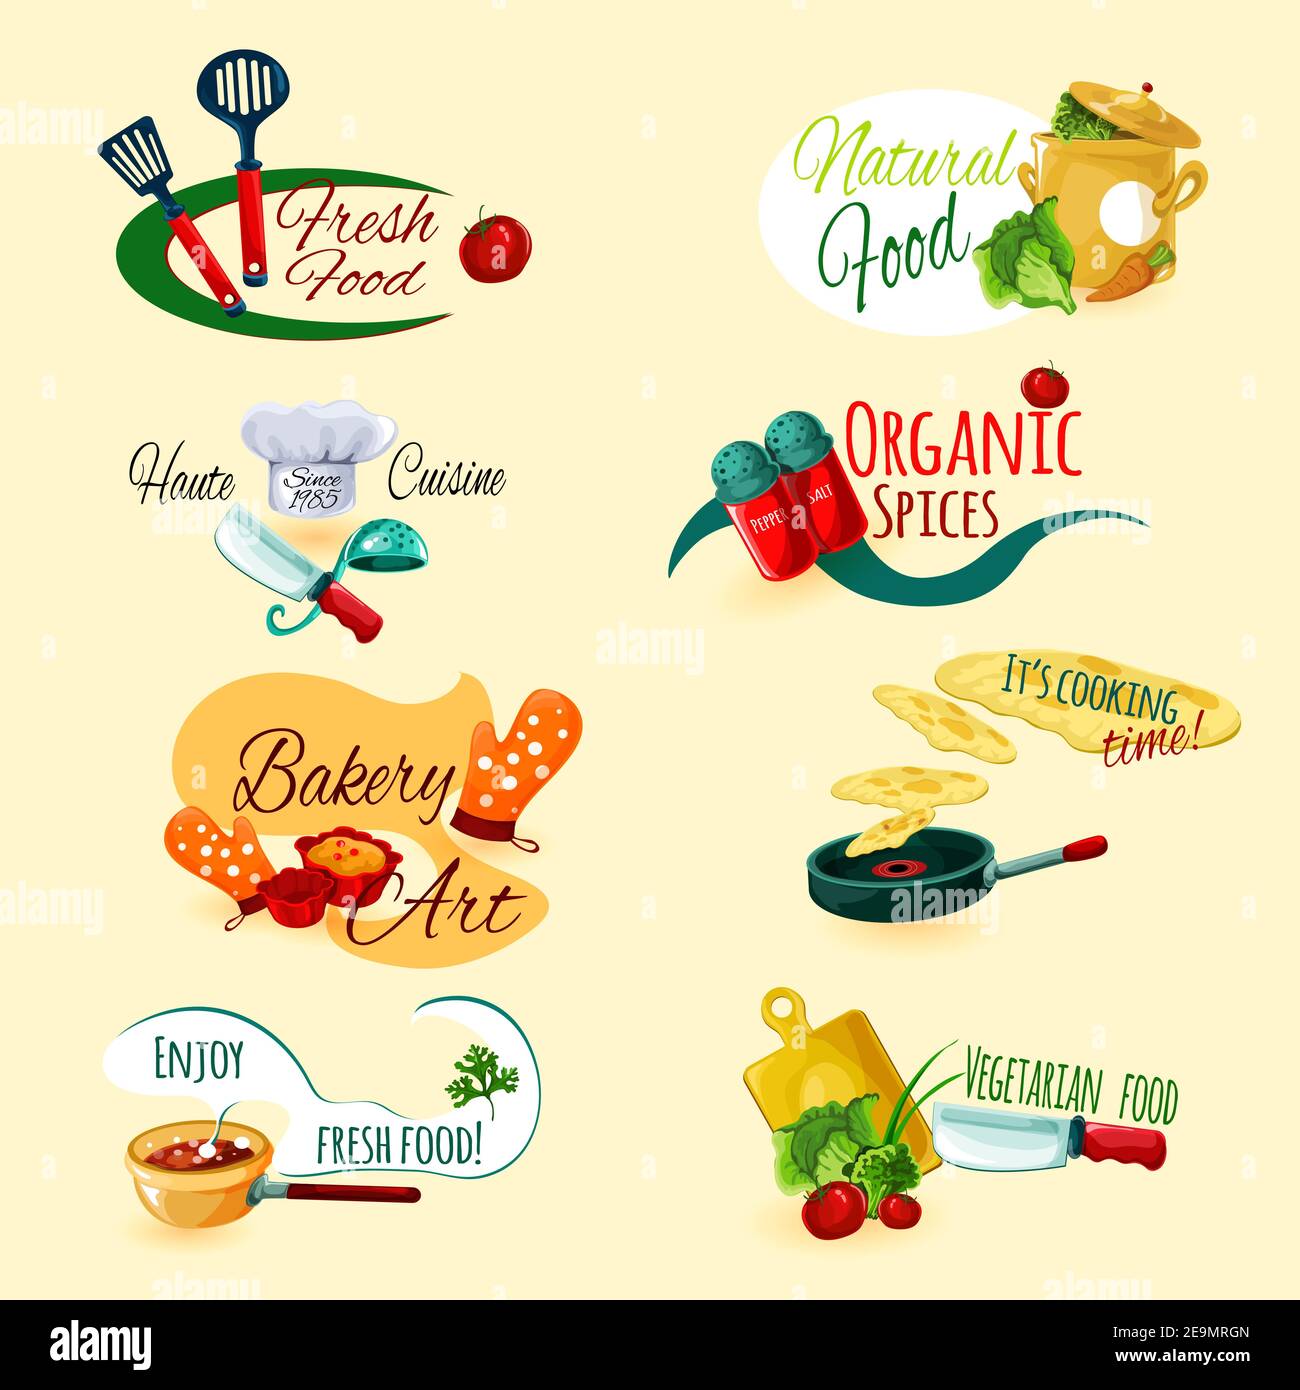 Fresh natural food organic spices cooking and baking emblems set isolated vector illustration Stock Vector